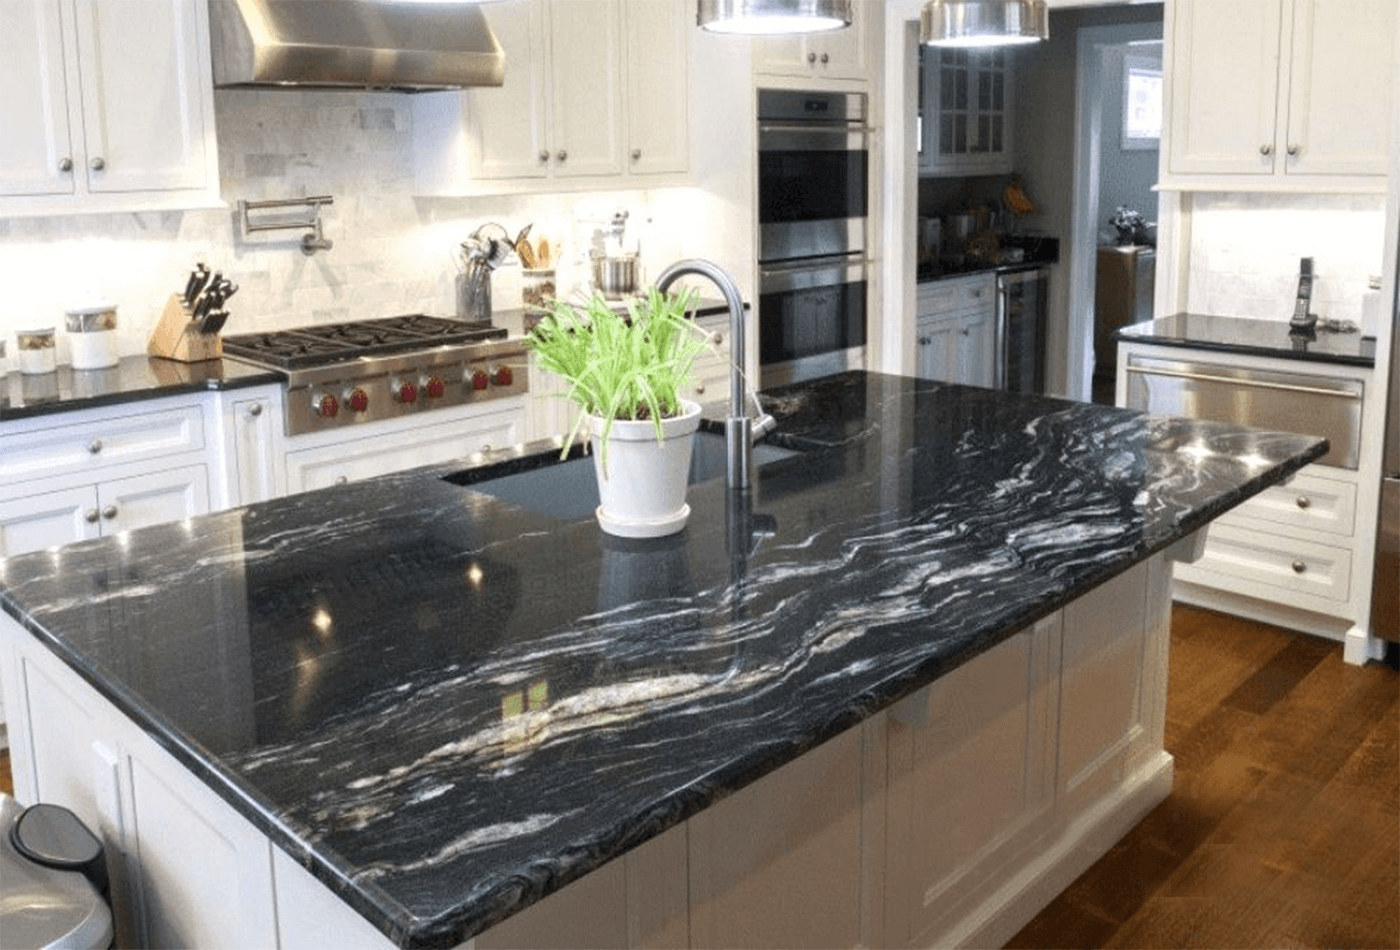 Are You Looking For The Branded Black Granite Countertops?